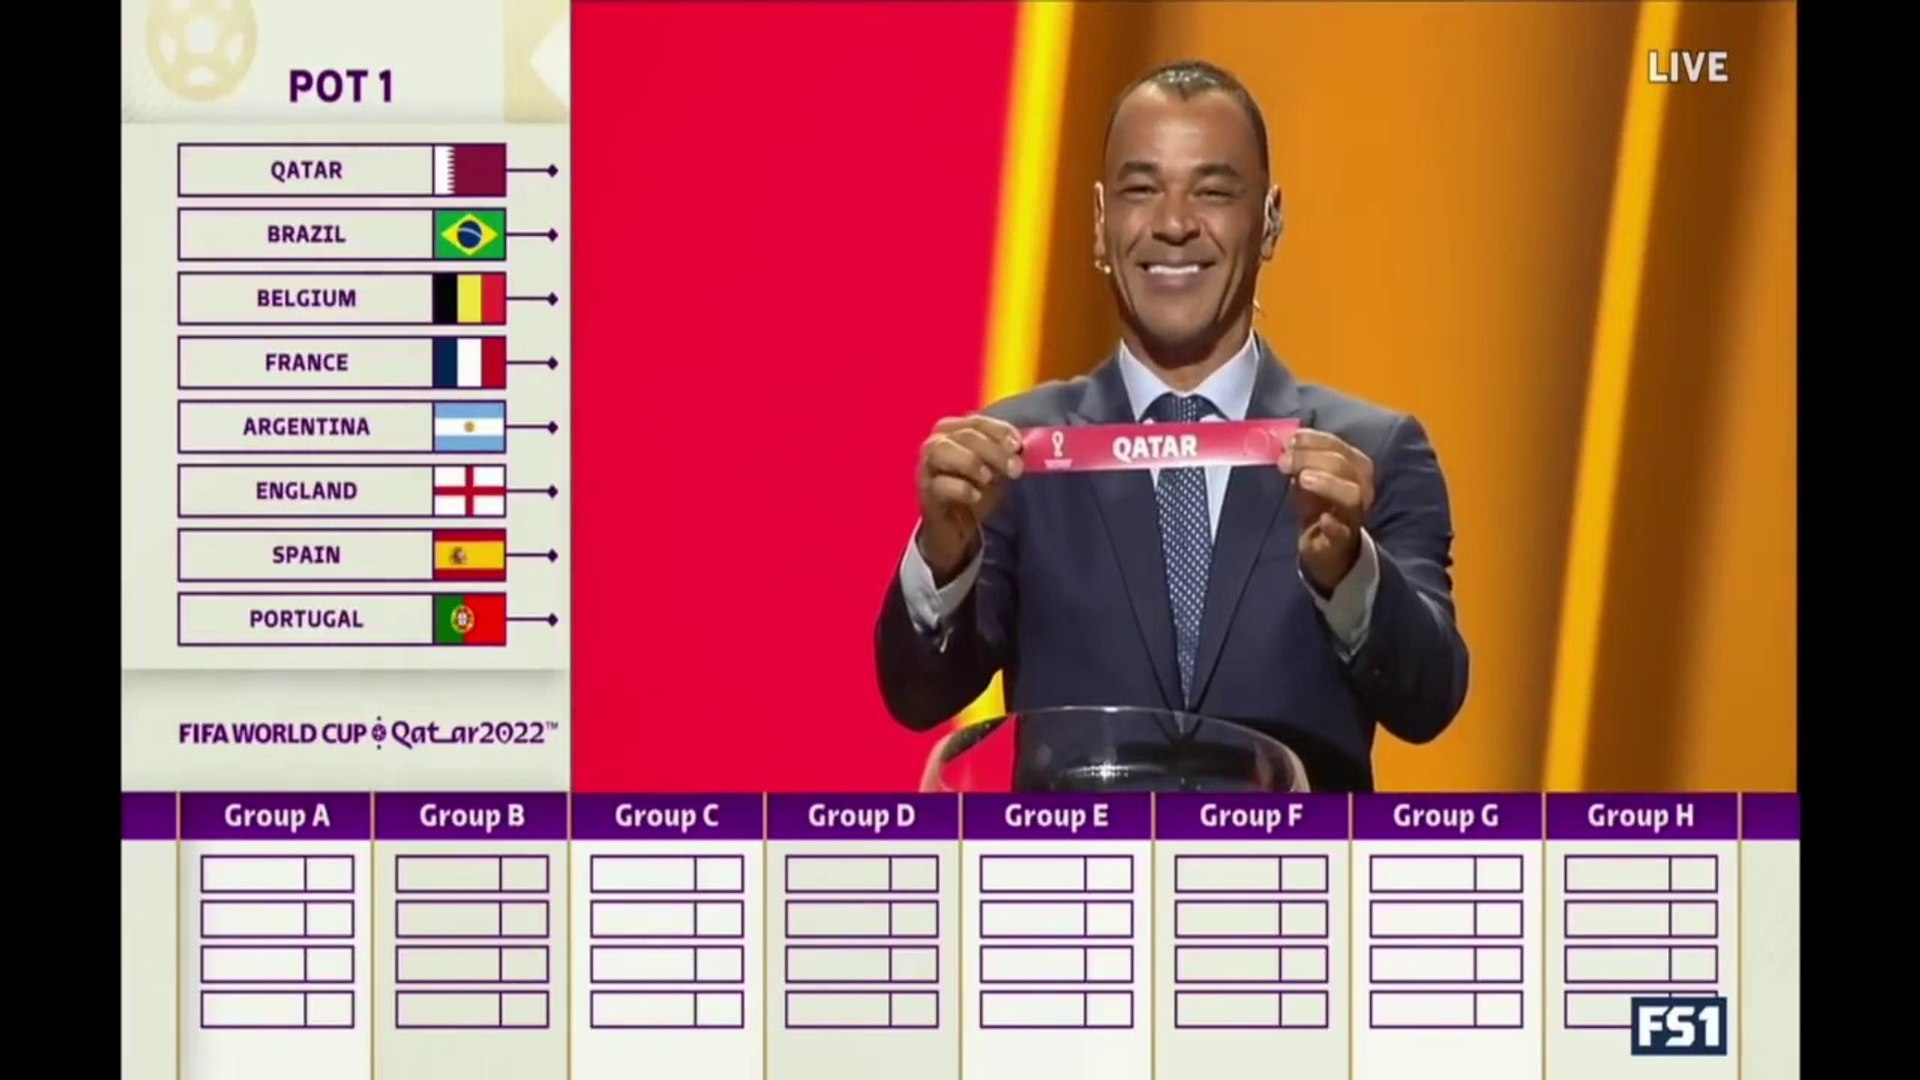 Draw for the group stage of the World Cup 2022 - FIFA World Cup 2022